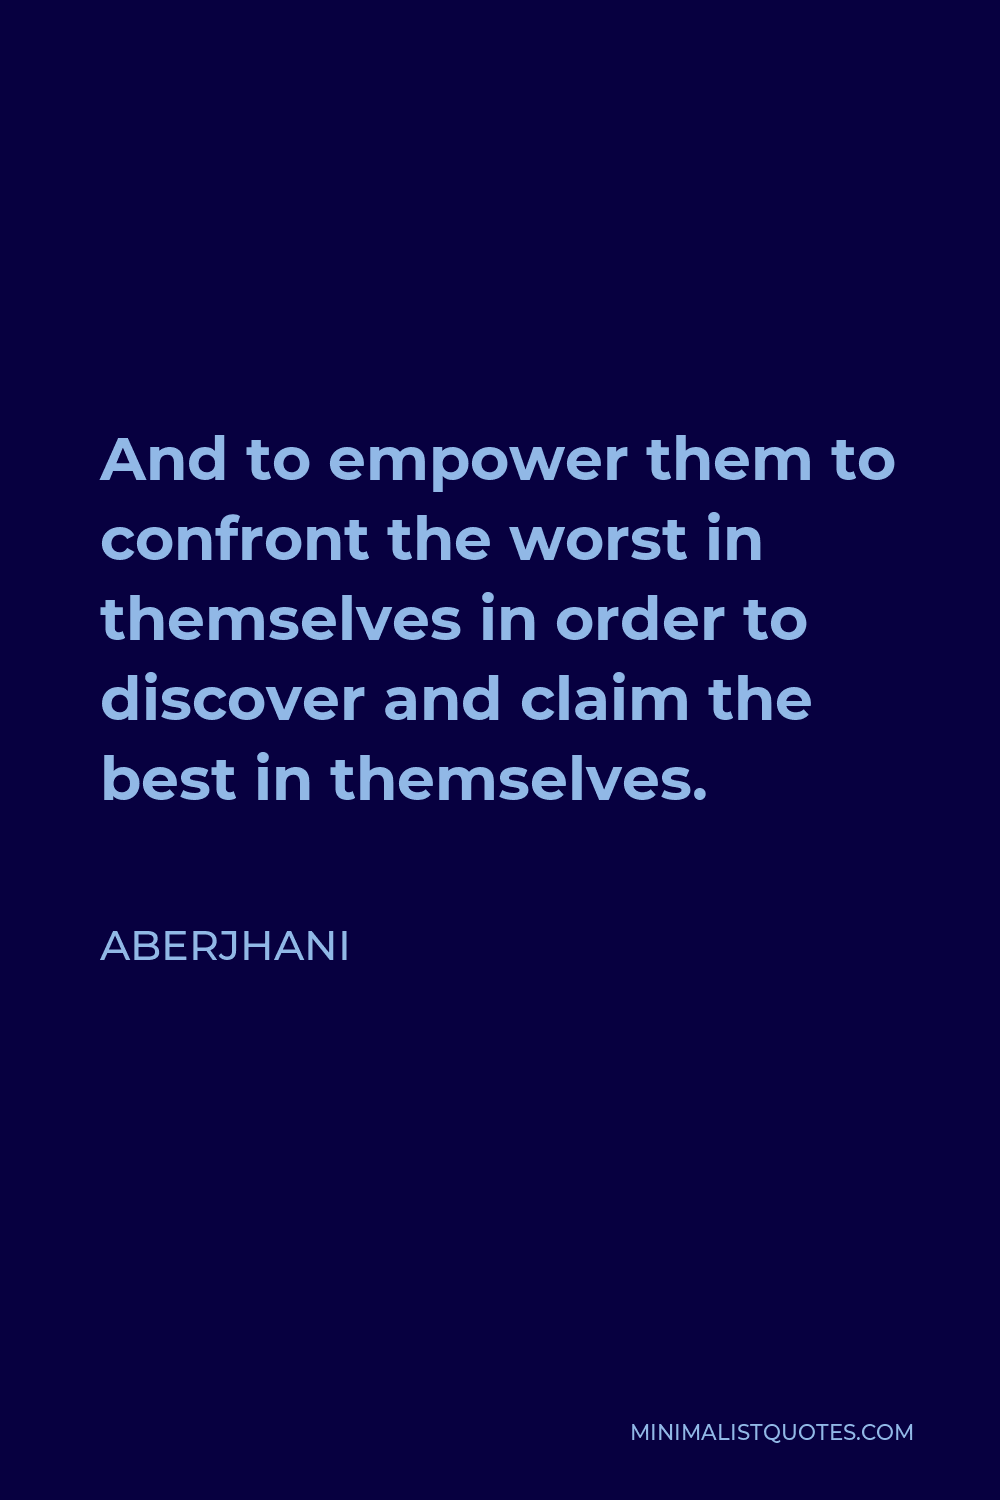 Aberjhani Quote - And to empower them to confront the worst in themselves in order to discover and claim the best in themselves.